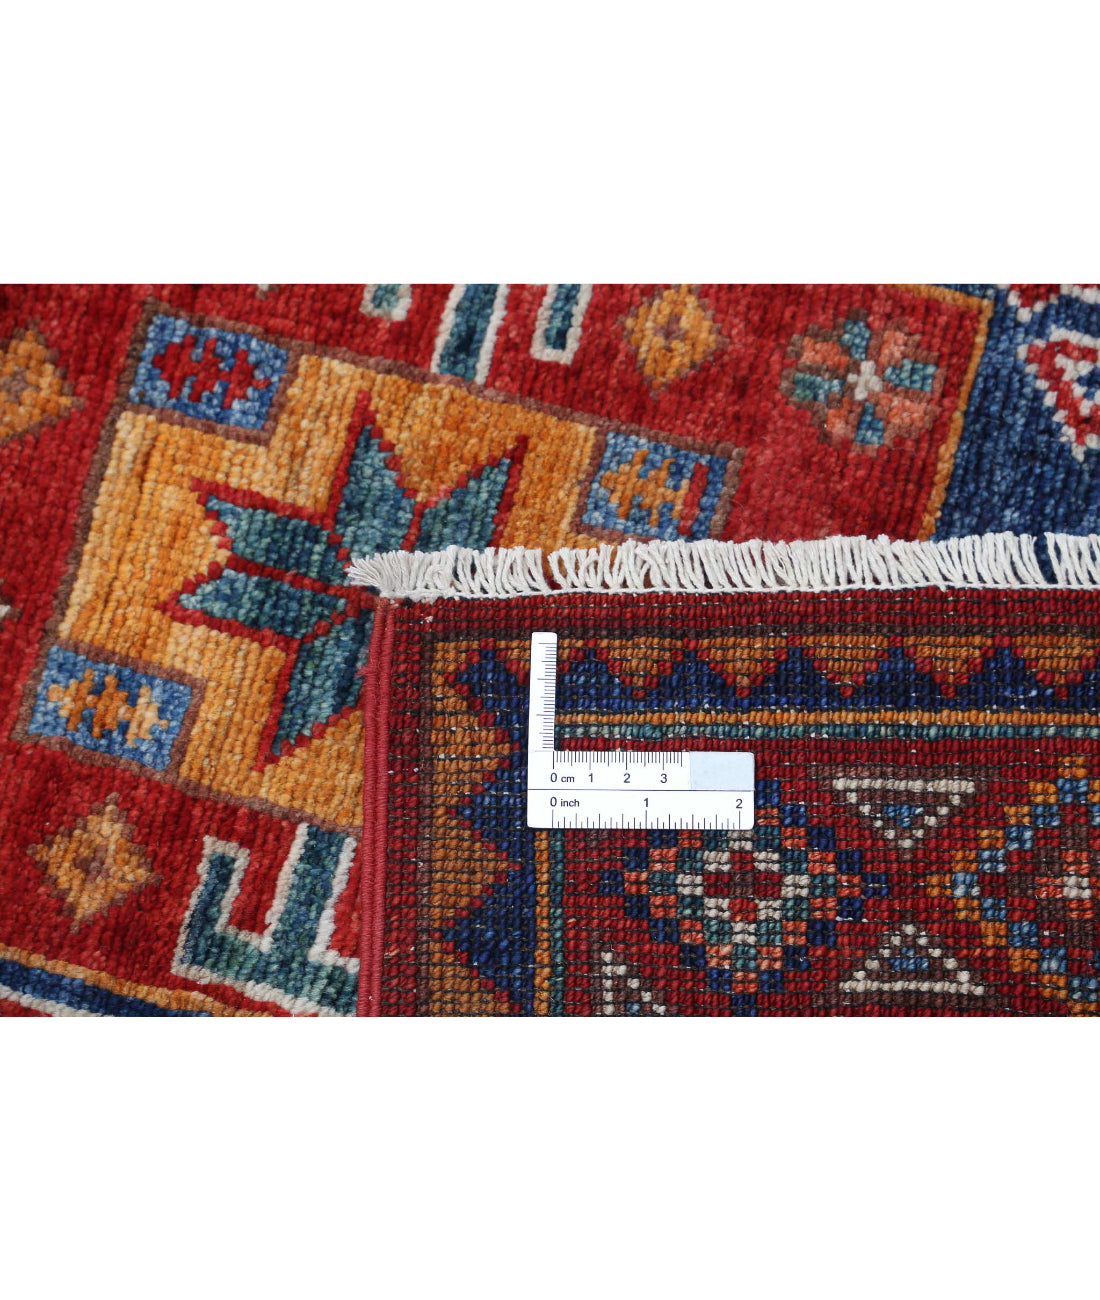 Hand Knotted Nomadic Caucasian Humna Wool Rug - 2'9'' x 8'1'' 2'9'' x 8'1'' (83 X 243) / Red / Blue